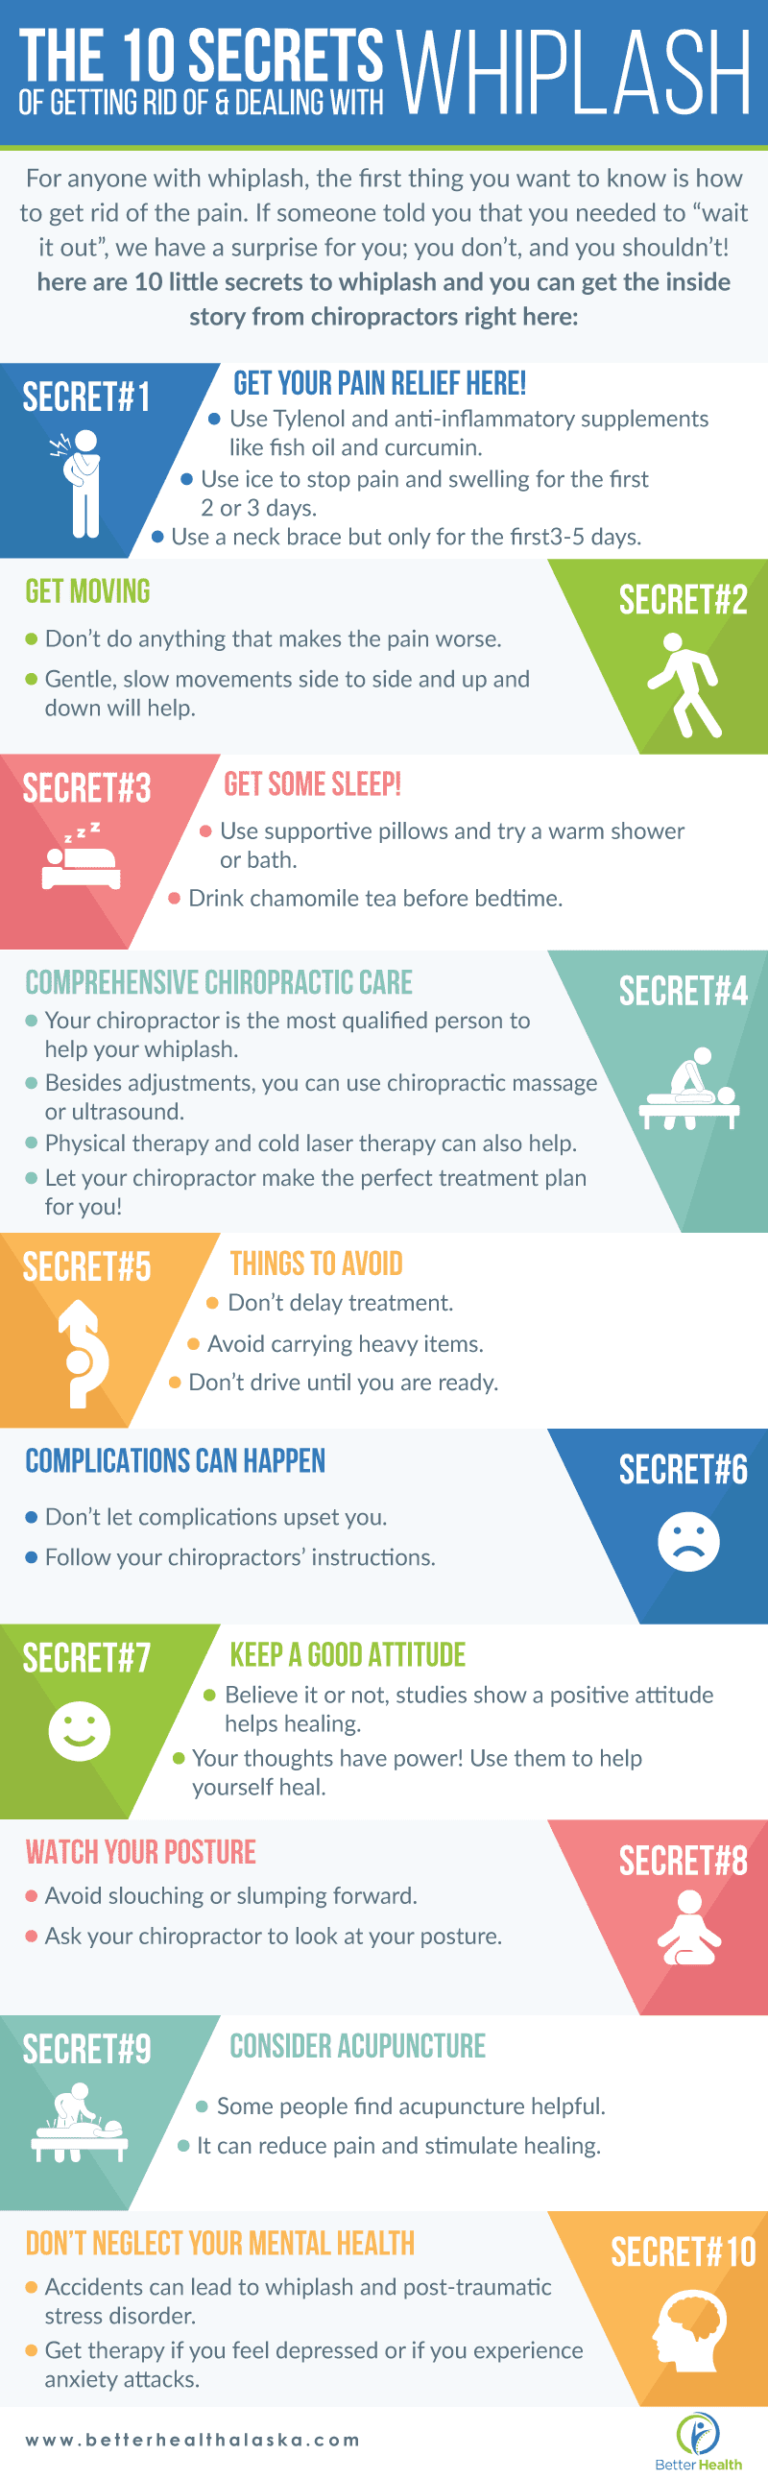 An infographic about 10 secrets to deal with whiplash pain.